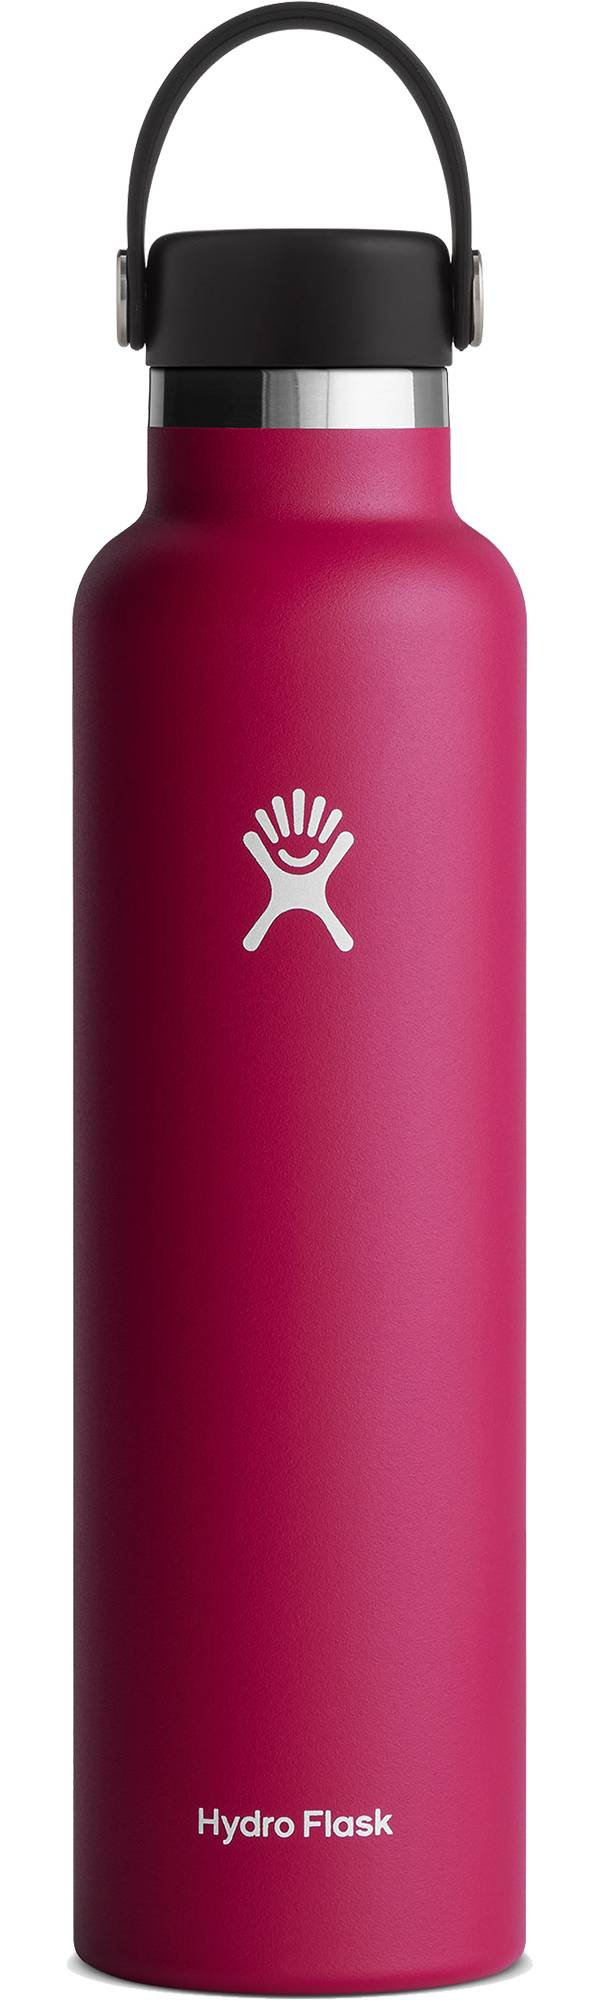 Hydro Flask Standard Mouth 24 oz. Bottle product image